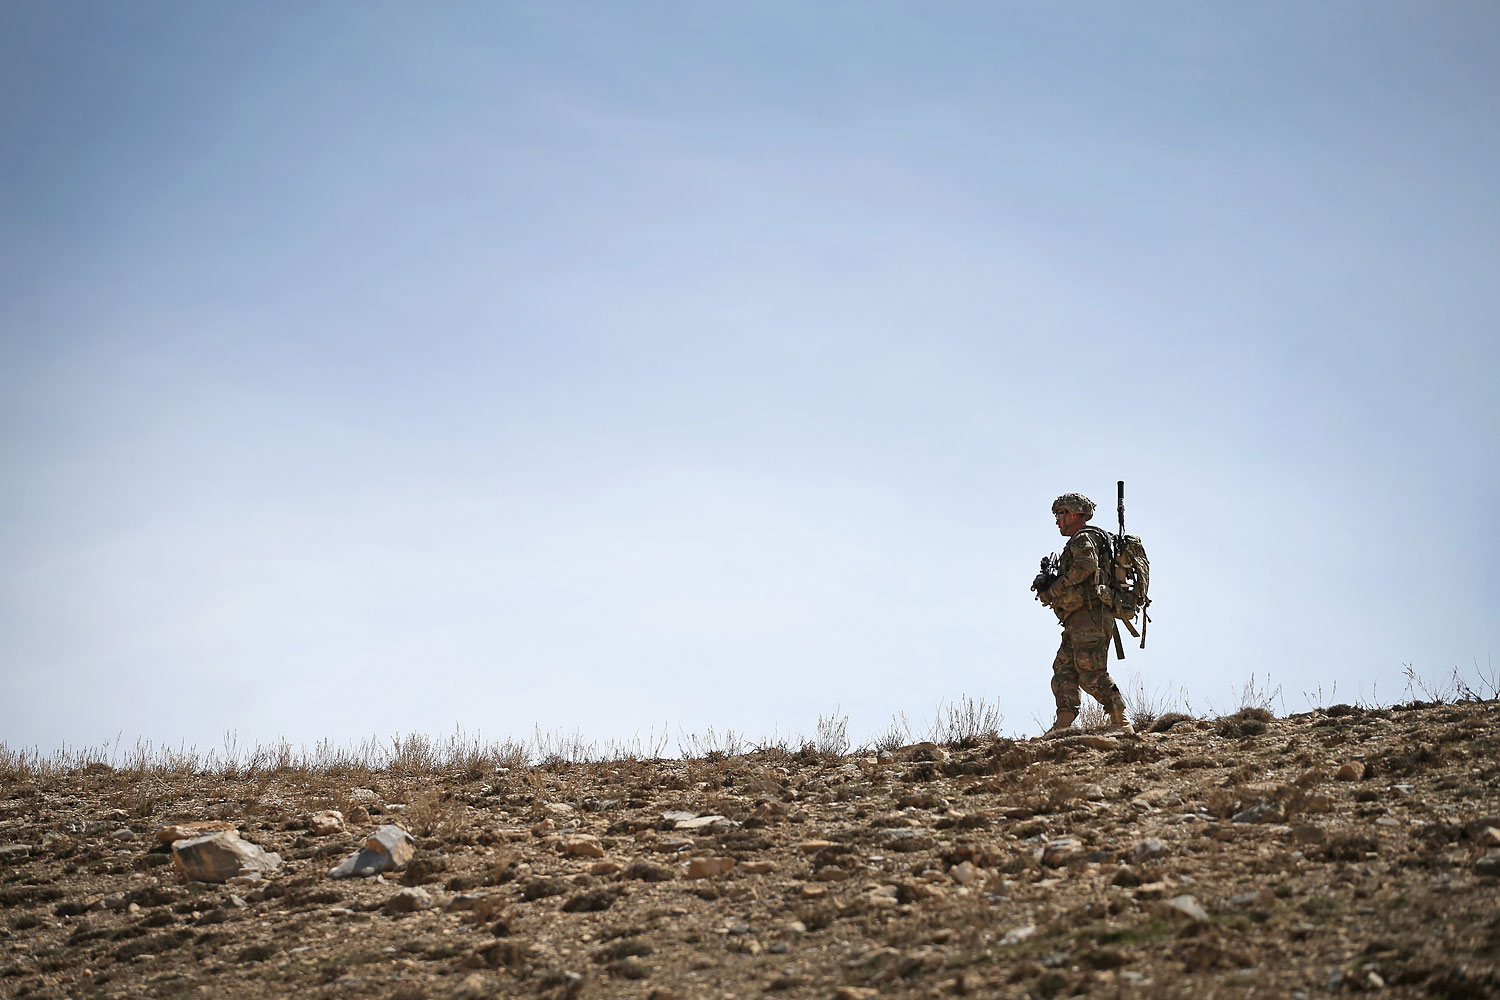 U.S. soldier walks along a ridgeline during a patrol up a mountainside near Forward Operating Base Shank on March 31, 2014 near Pul-e Alam, Afghanistan. (Scott Olson—Getty Images)